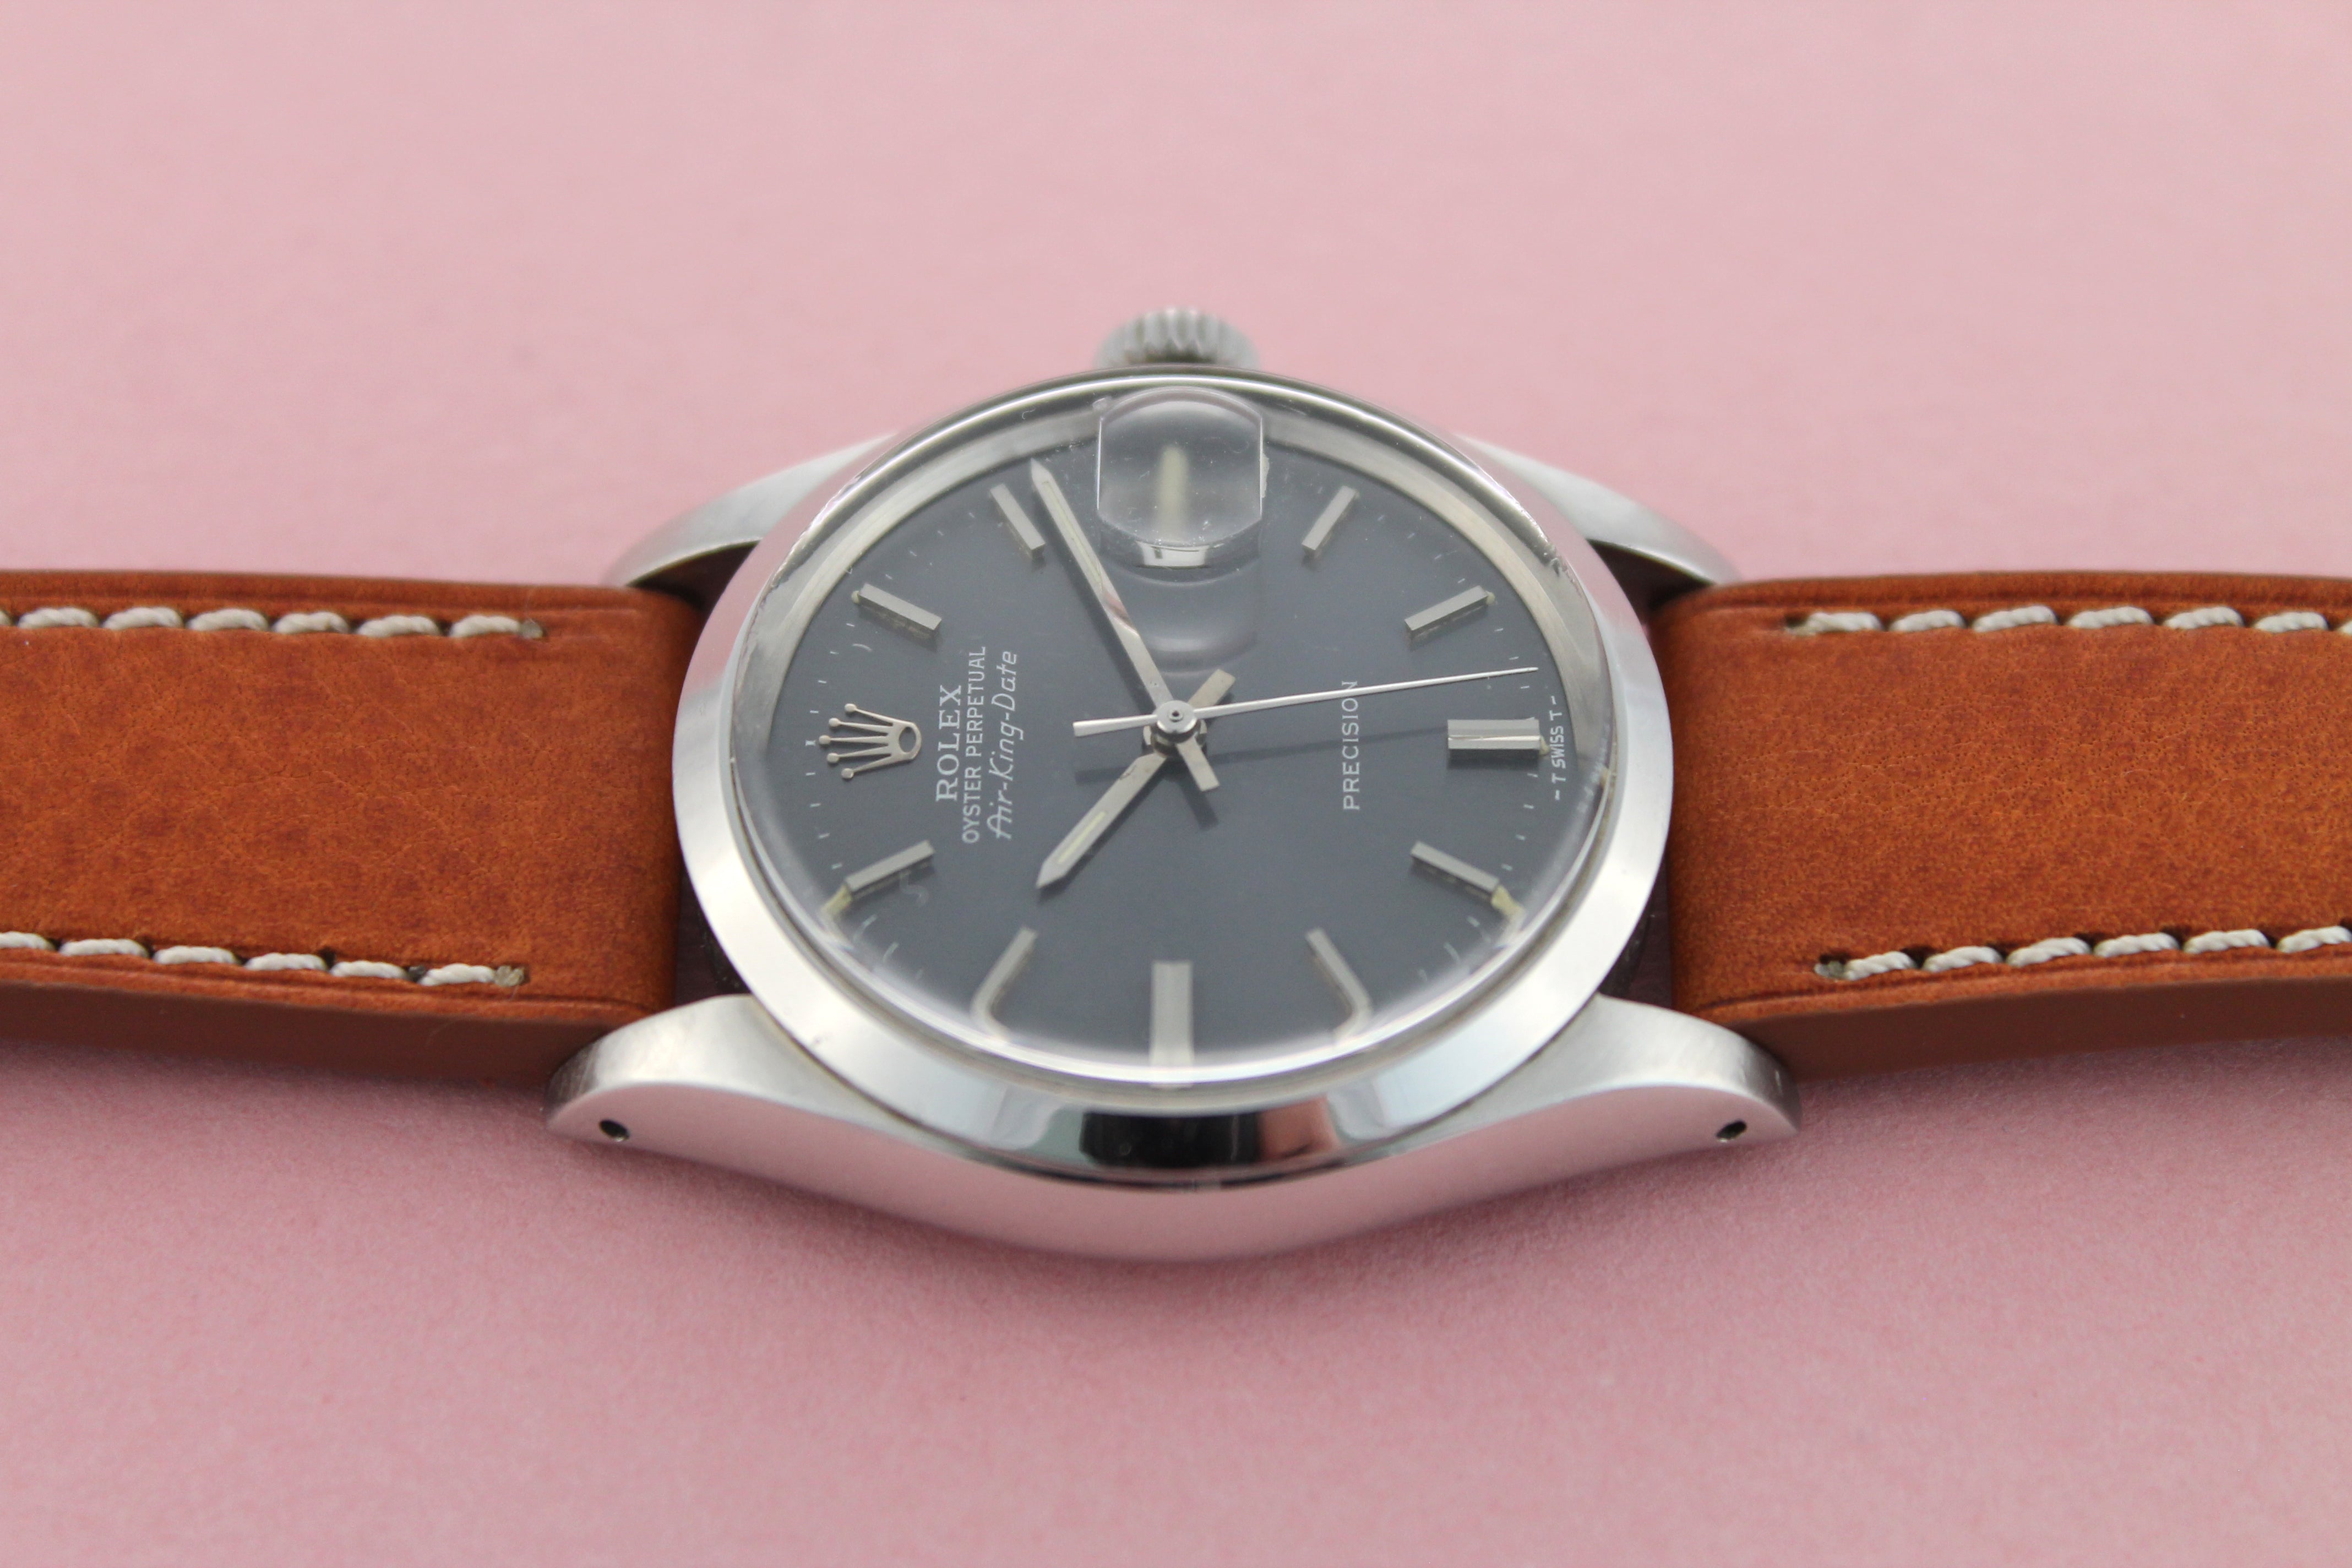 ROLEX Oyster Perpetual Air King Date Ref 5700 (1972)